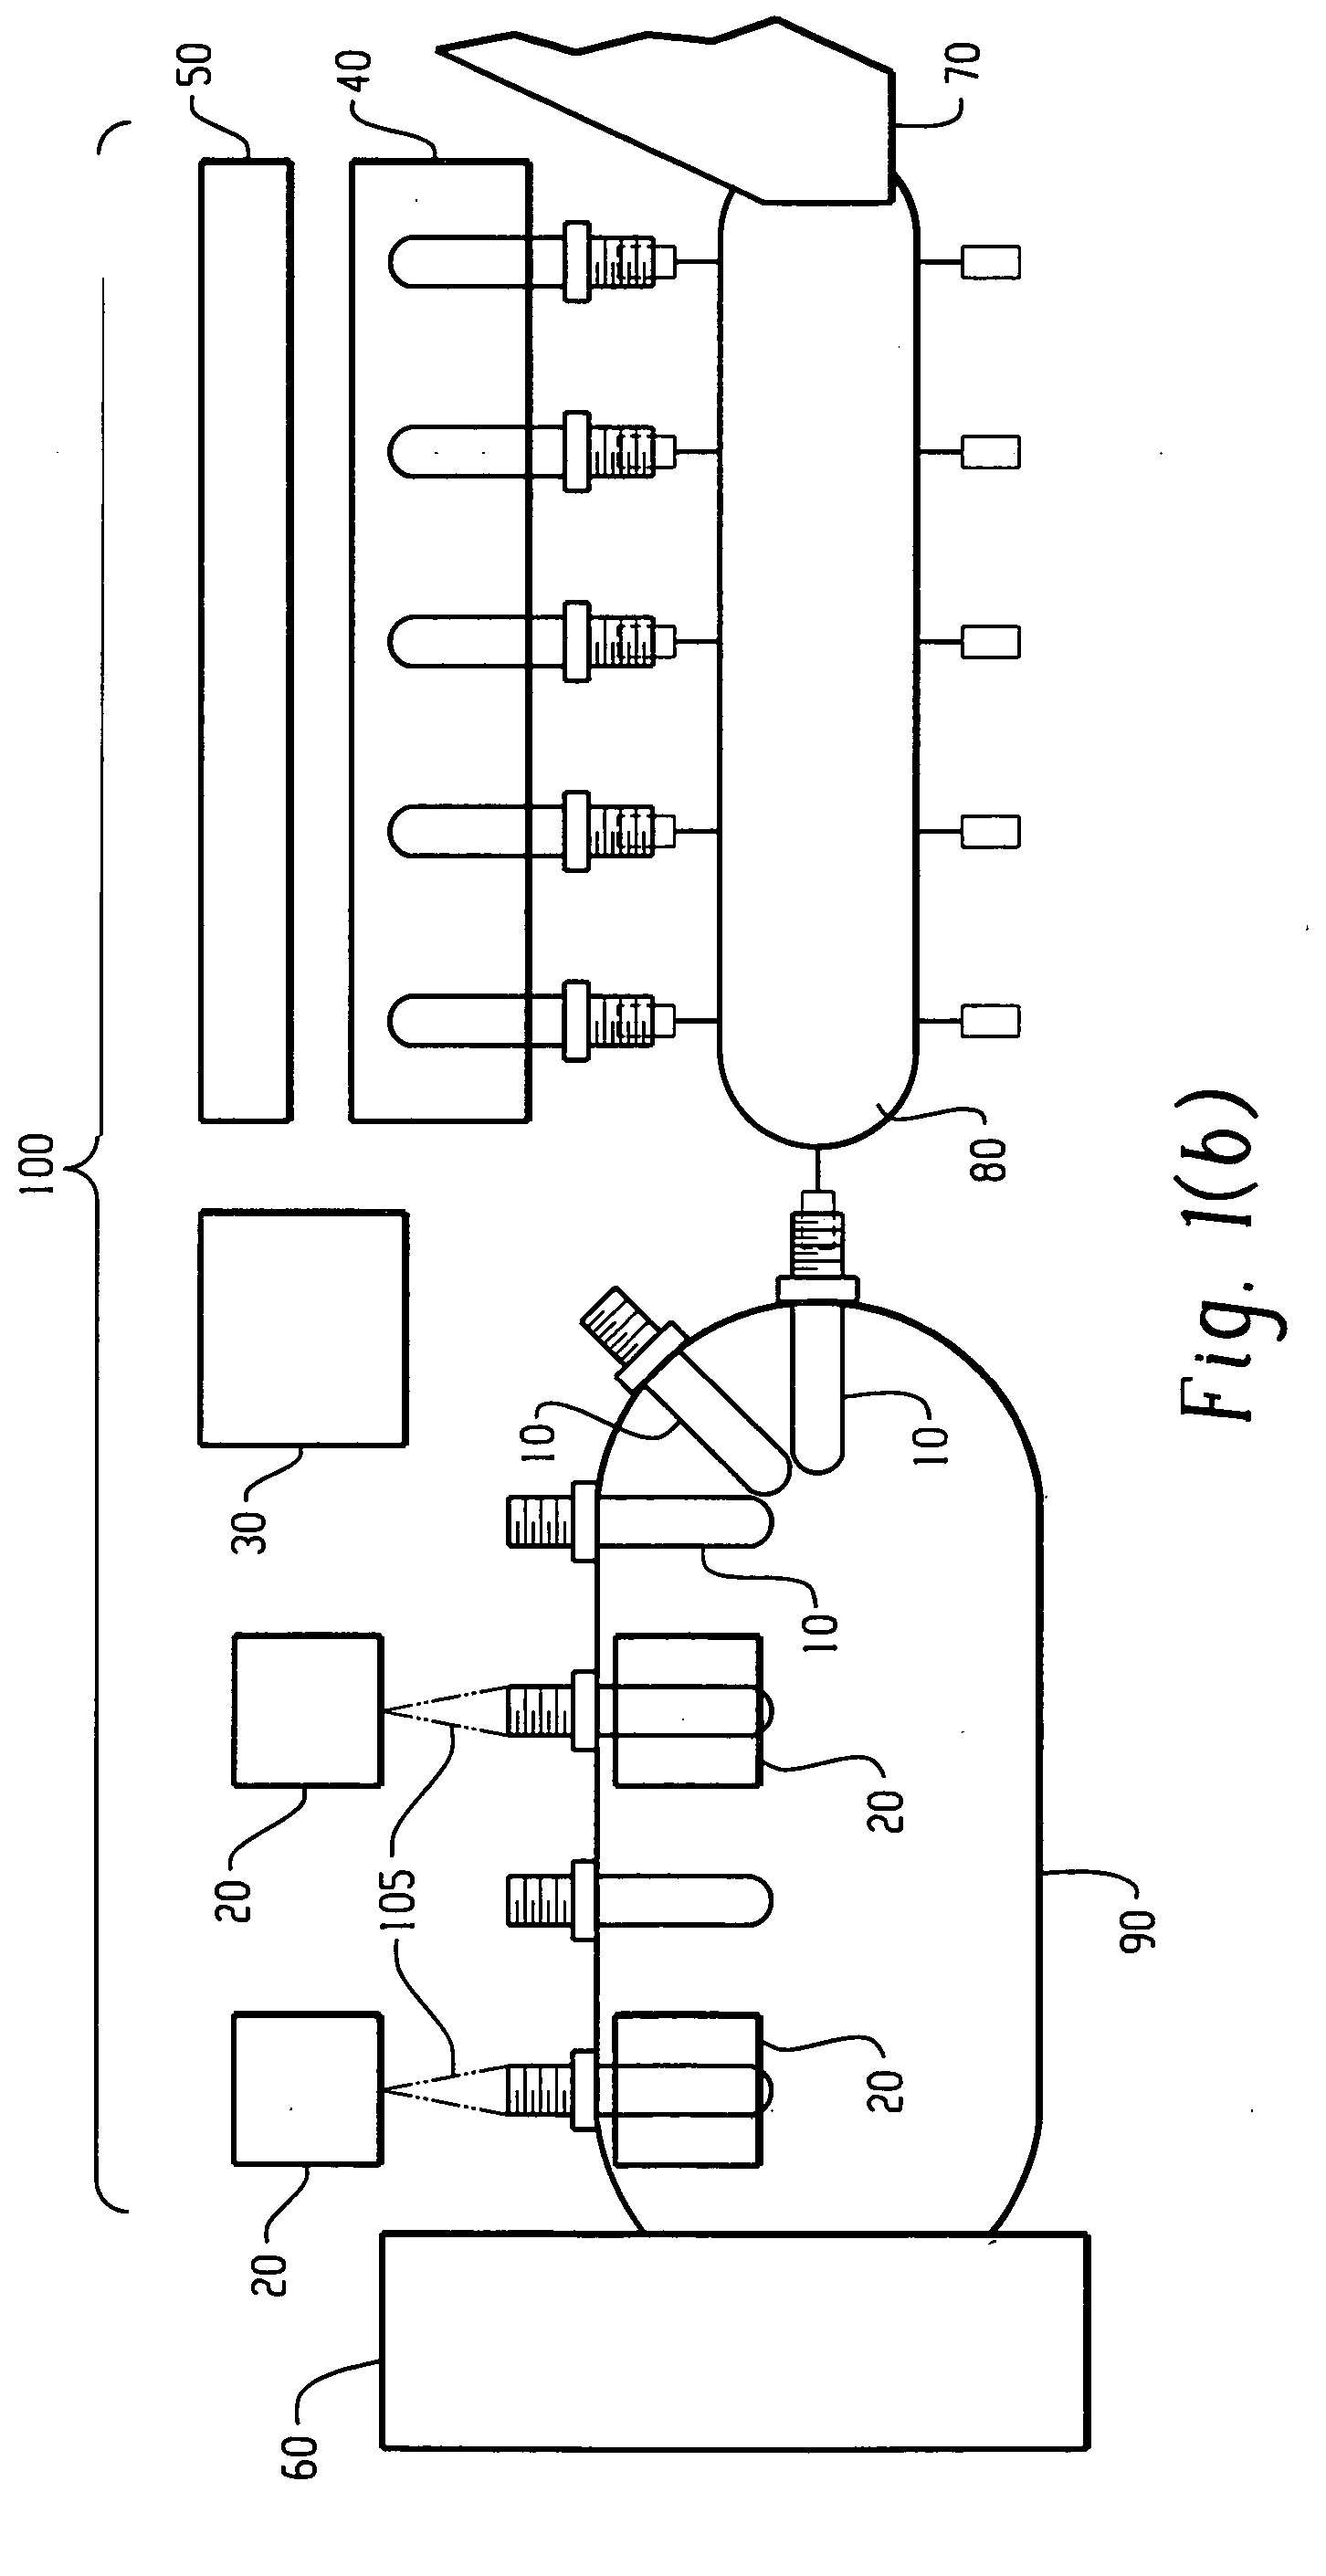 Method and apparatus for the measurement and control of both the inside and outside surface temperature of thermoplastic preforms during stretch blow molding operations